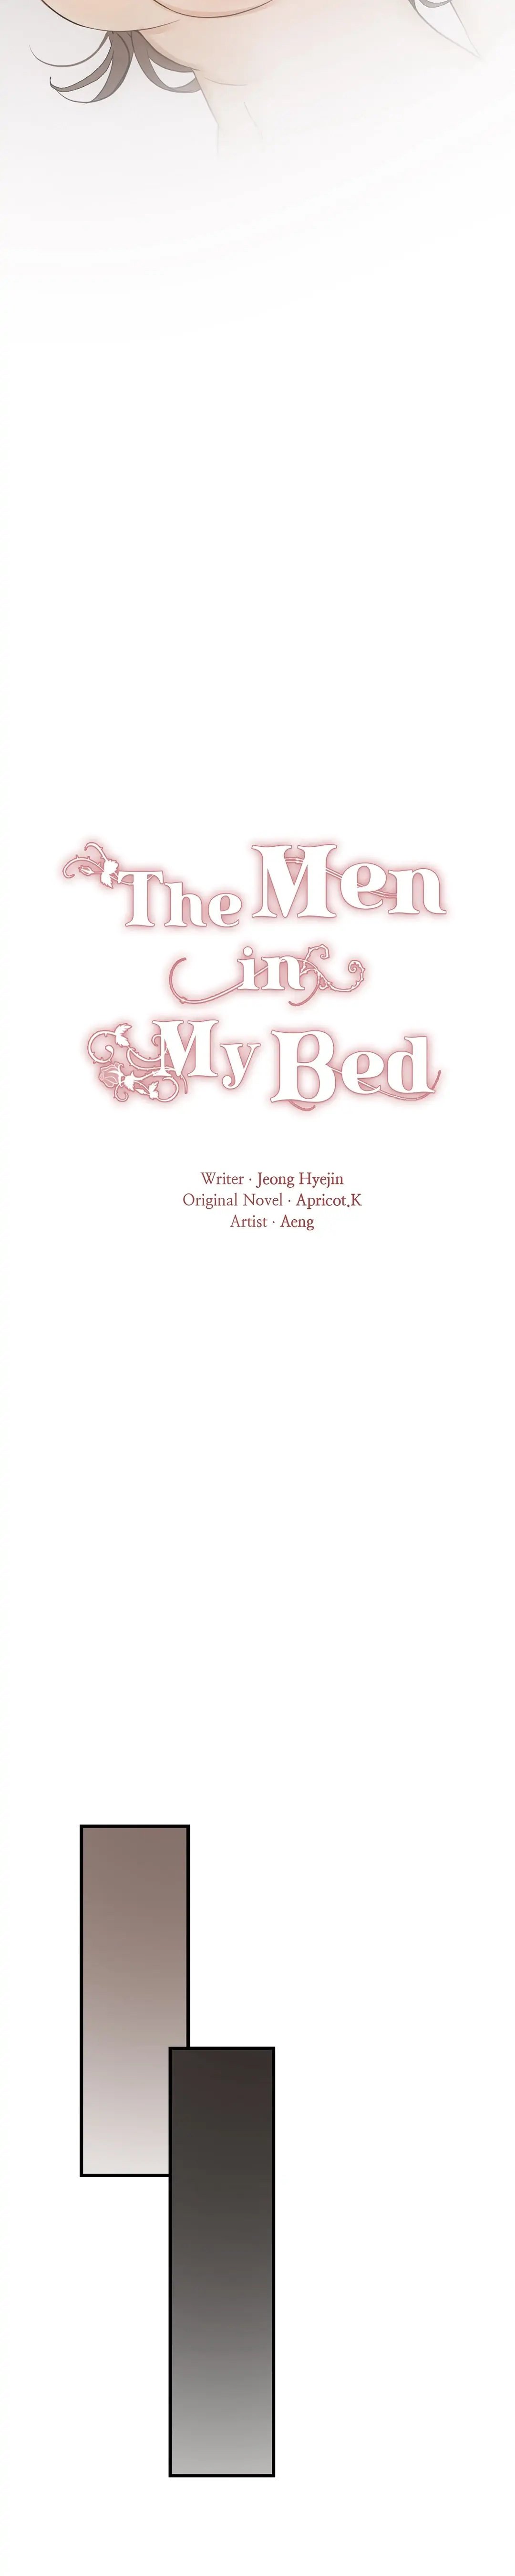 the-men-in-my-bed-chap-23-11